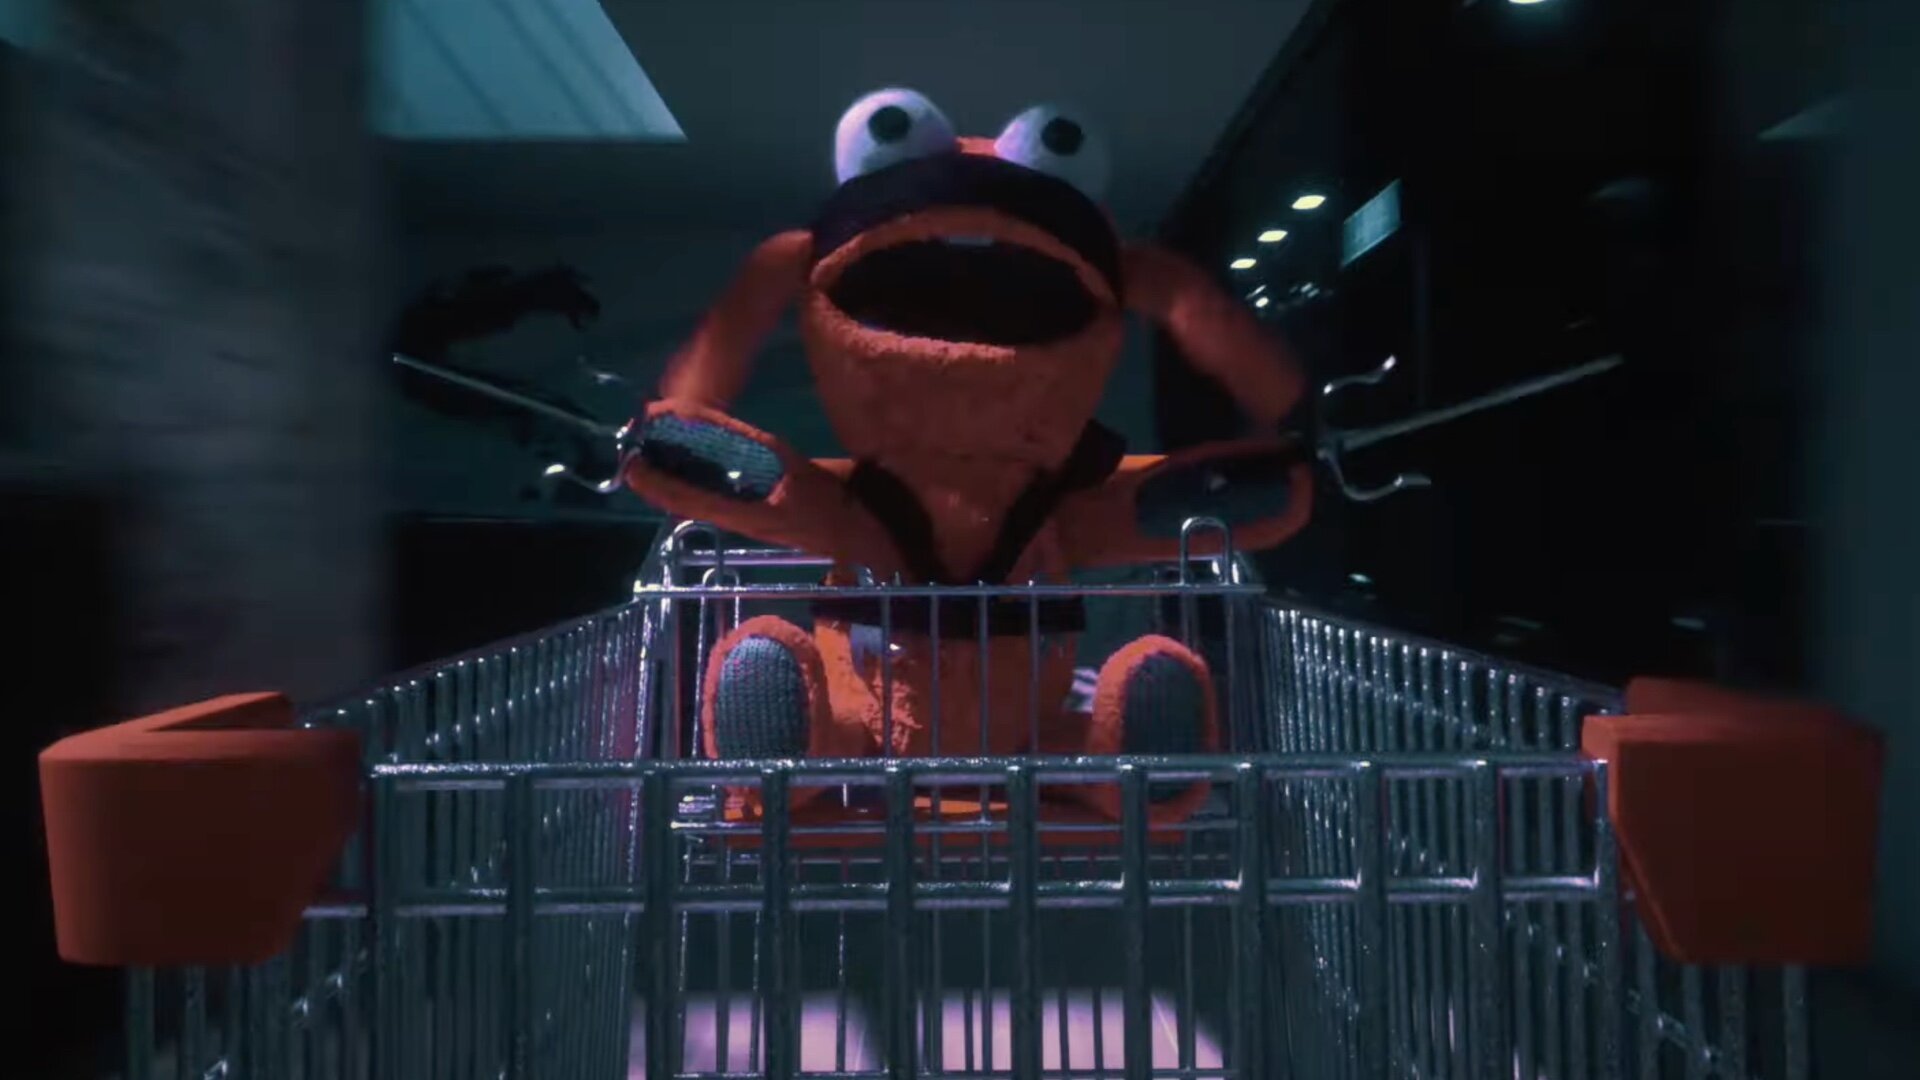 A Stuffed Animal Goes On Murder Spree In Trailer For The Horror